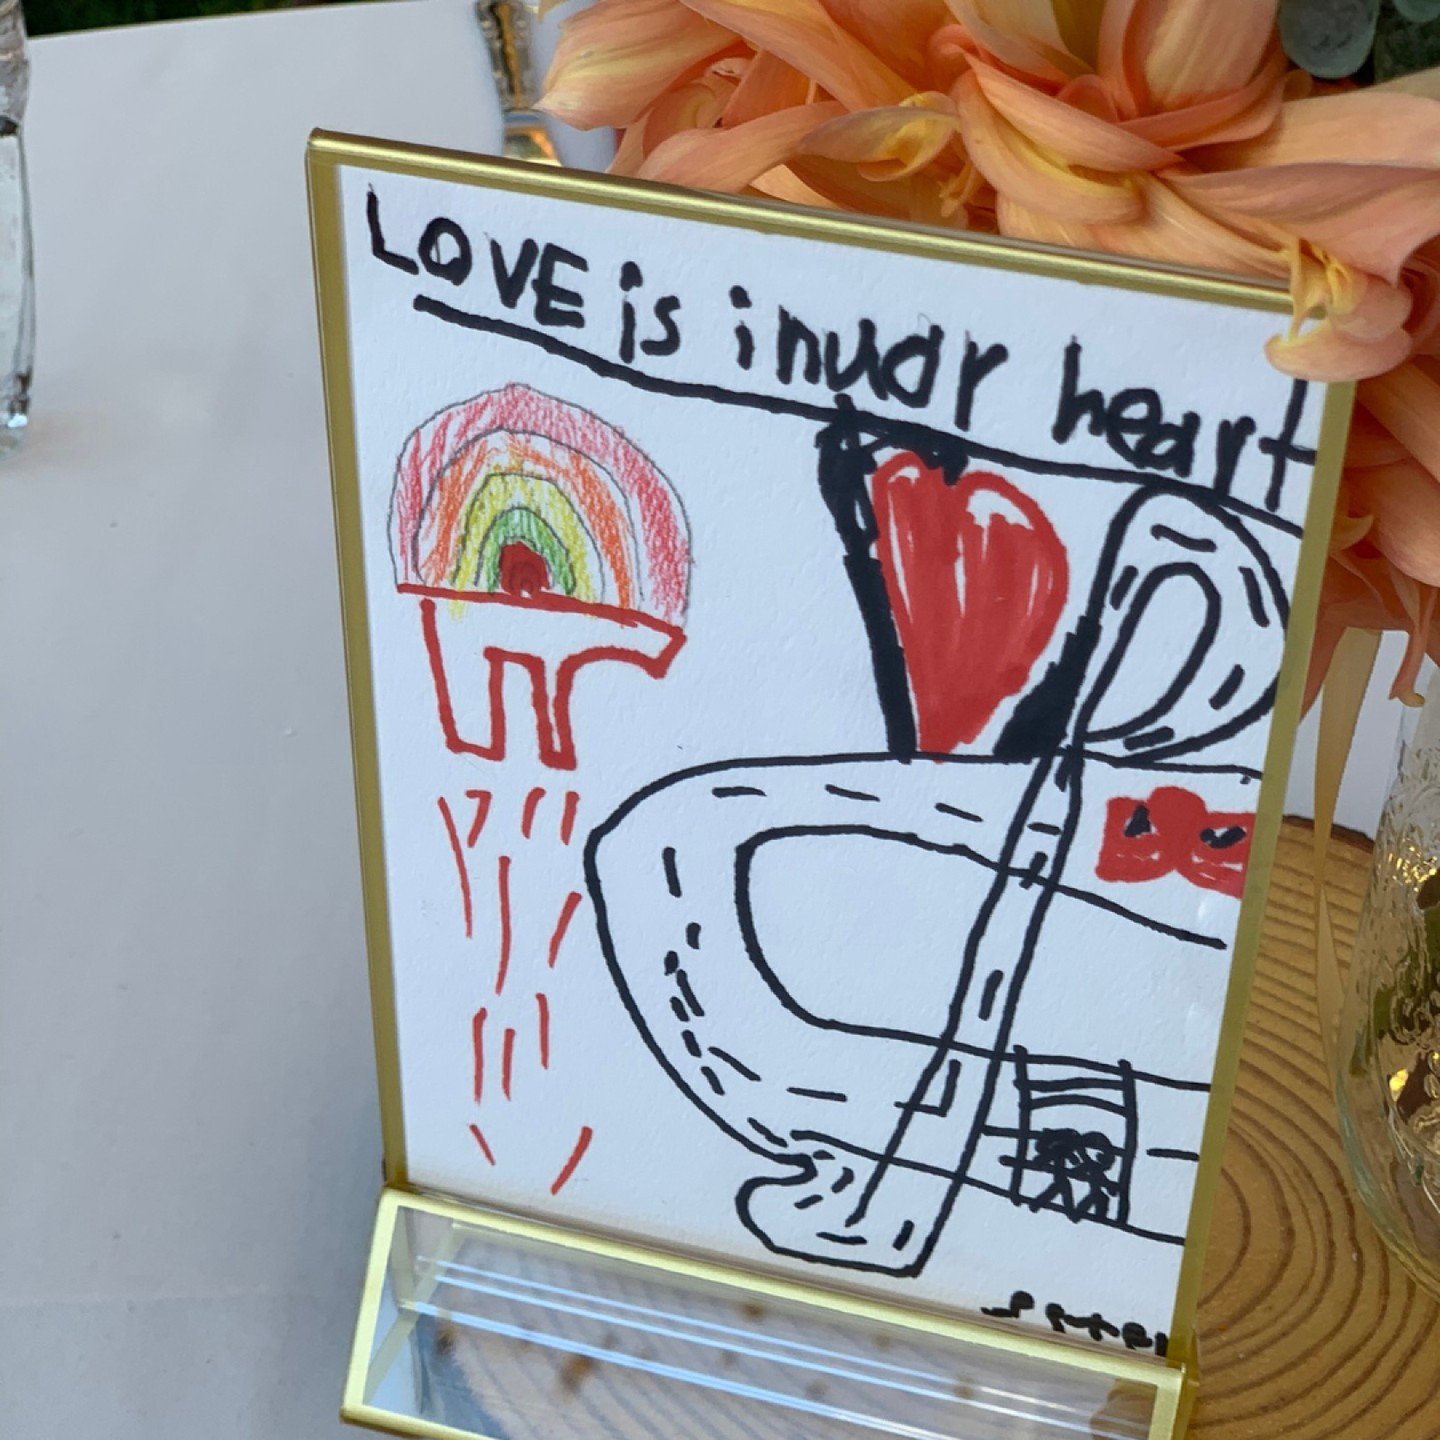 One of my all-time favorite intentional design decision - M asked her students to draw what love meant to them, and we used the drawings as the cutest table numbers. 

Each sketch was a window into the innocent and heartfelt interpretations of love, 